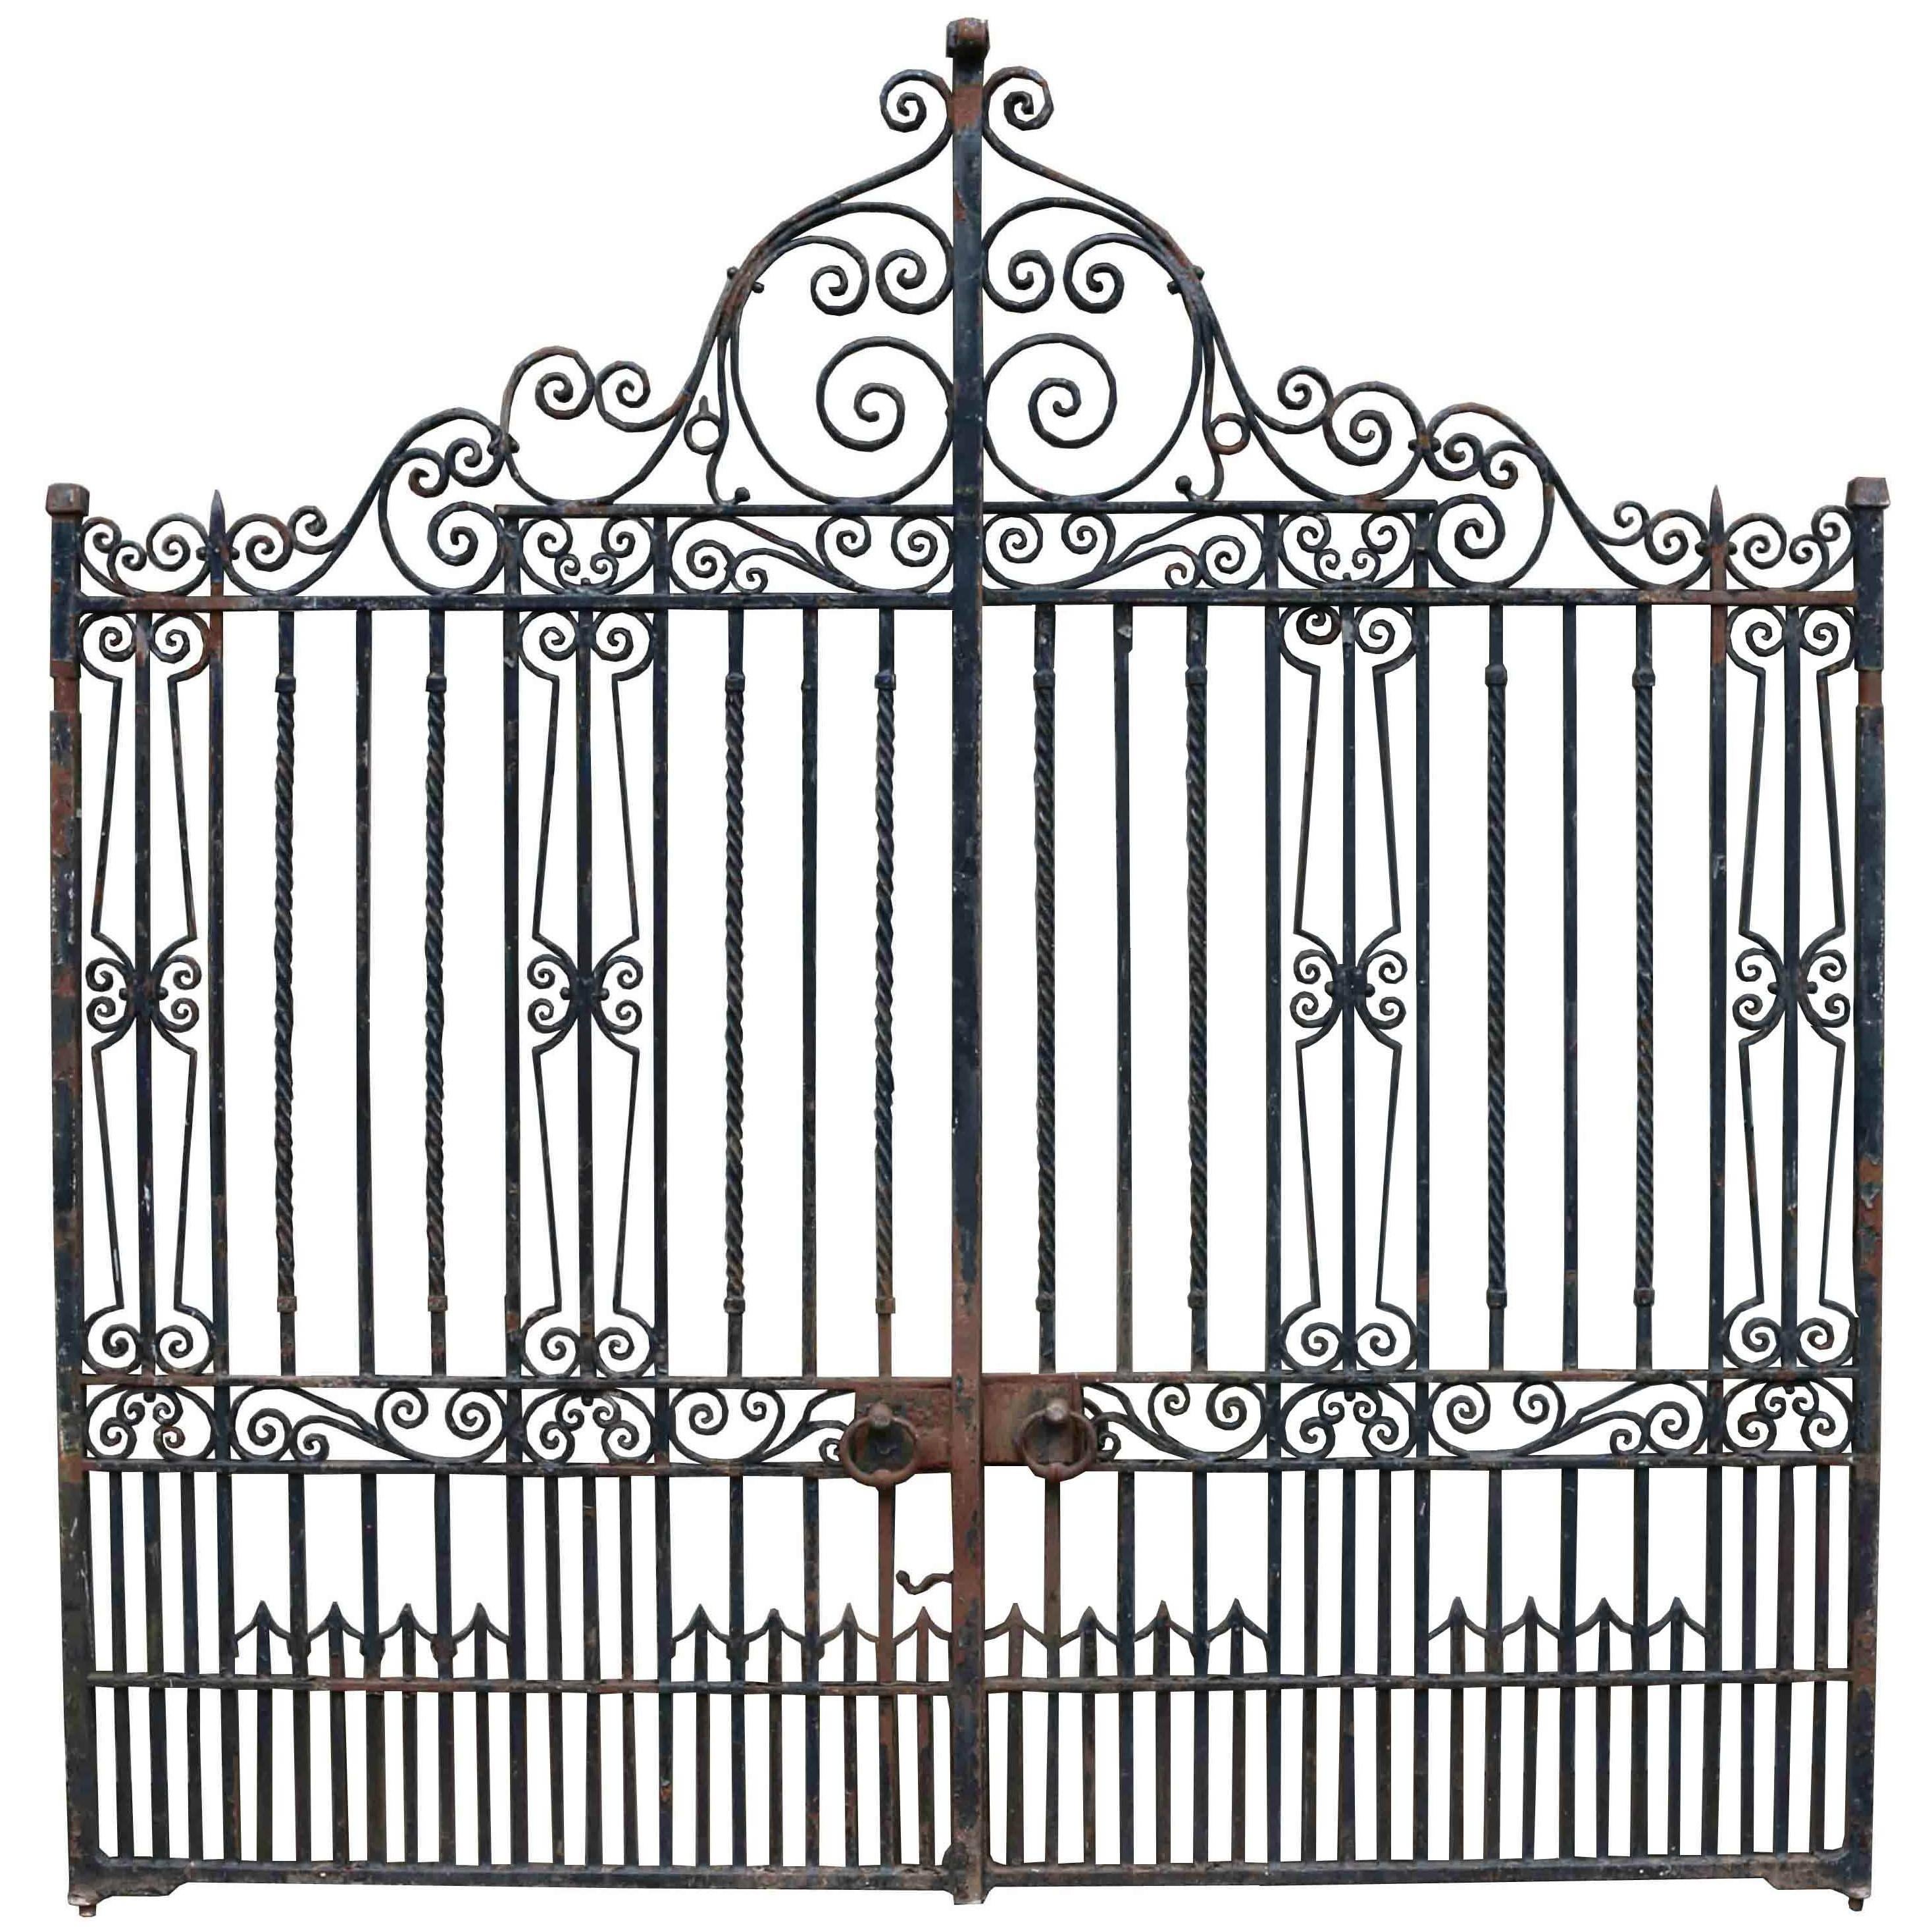 Pair of Antique Wrought Iron Driveway Gates